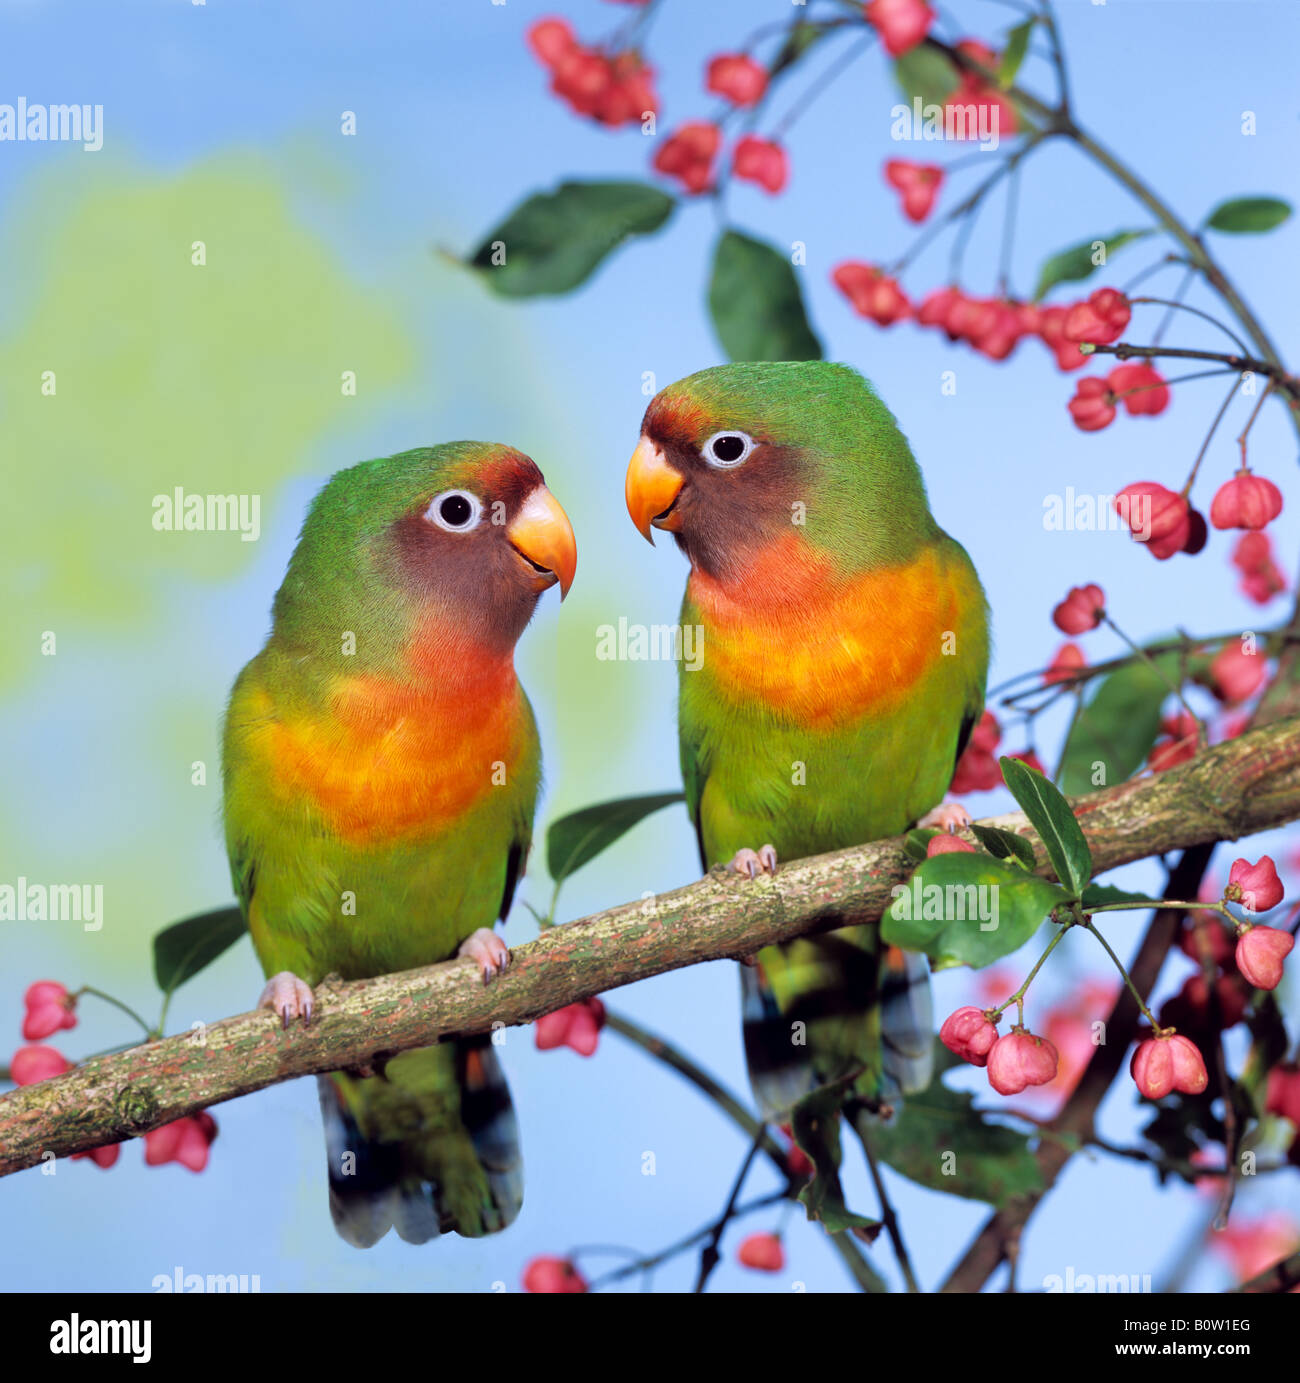 Two mixed-breed (Black-cheeked Lovebird x peach-faced lovebird) adults perched on a twig Stock Photo